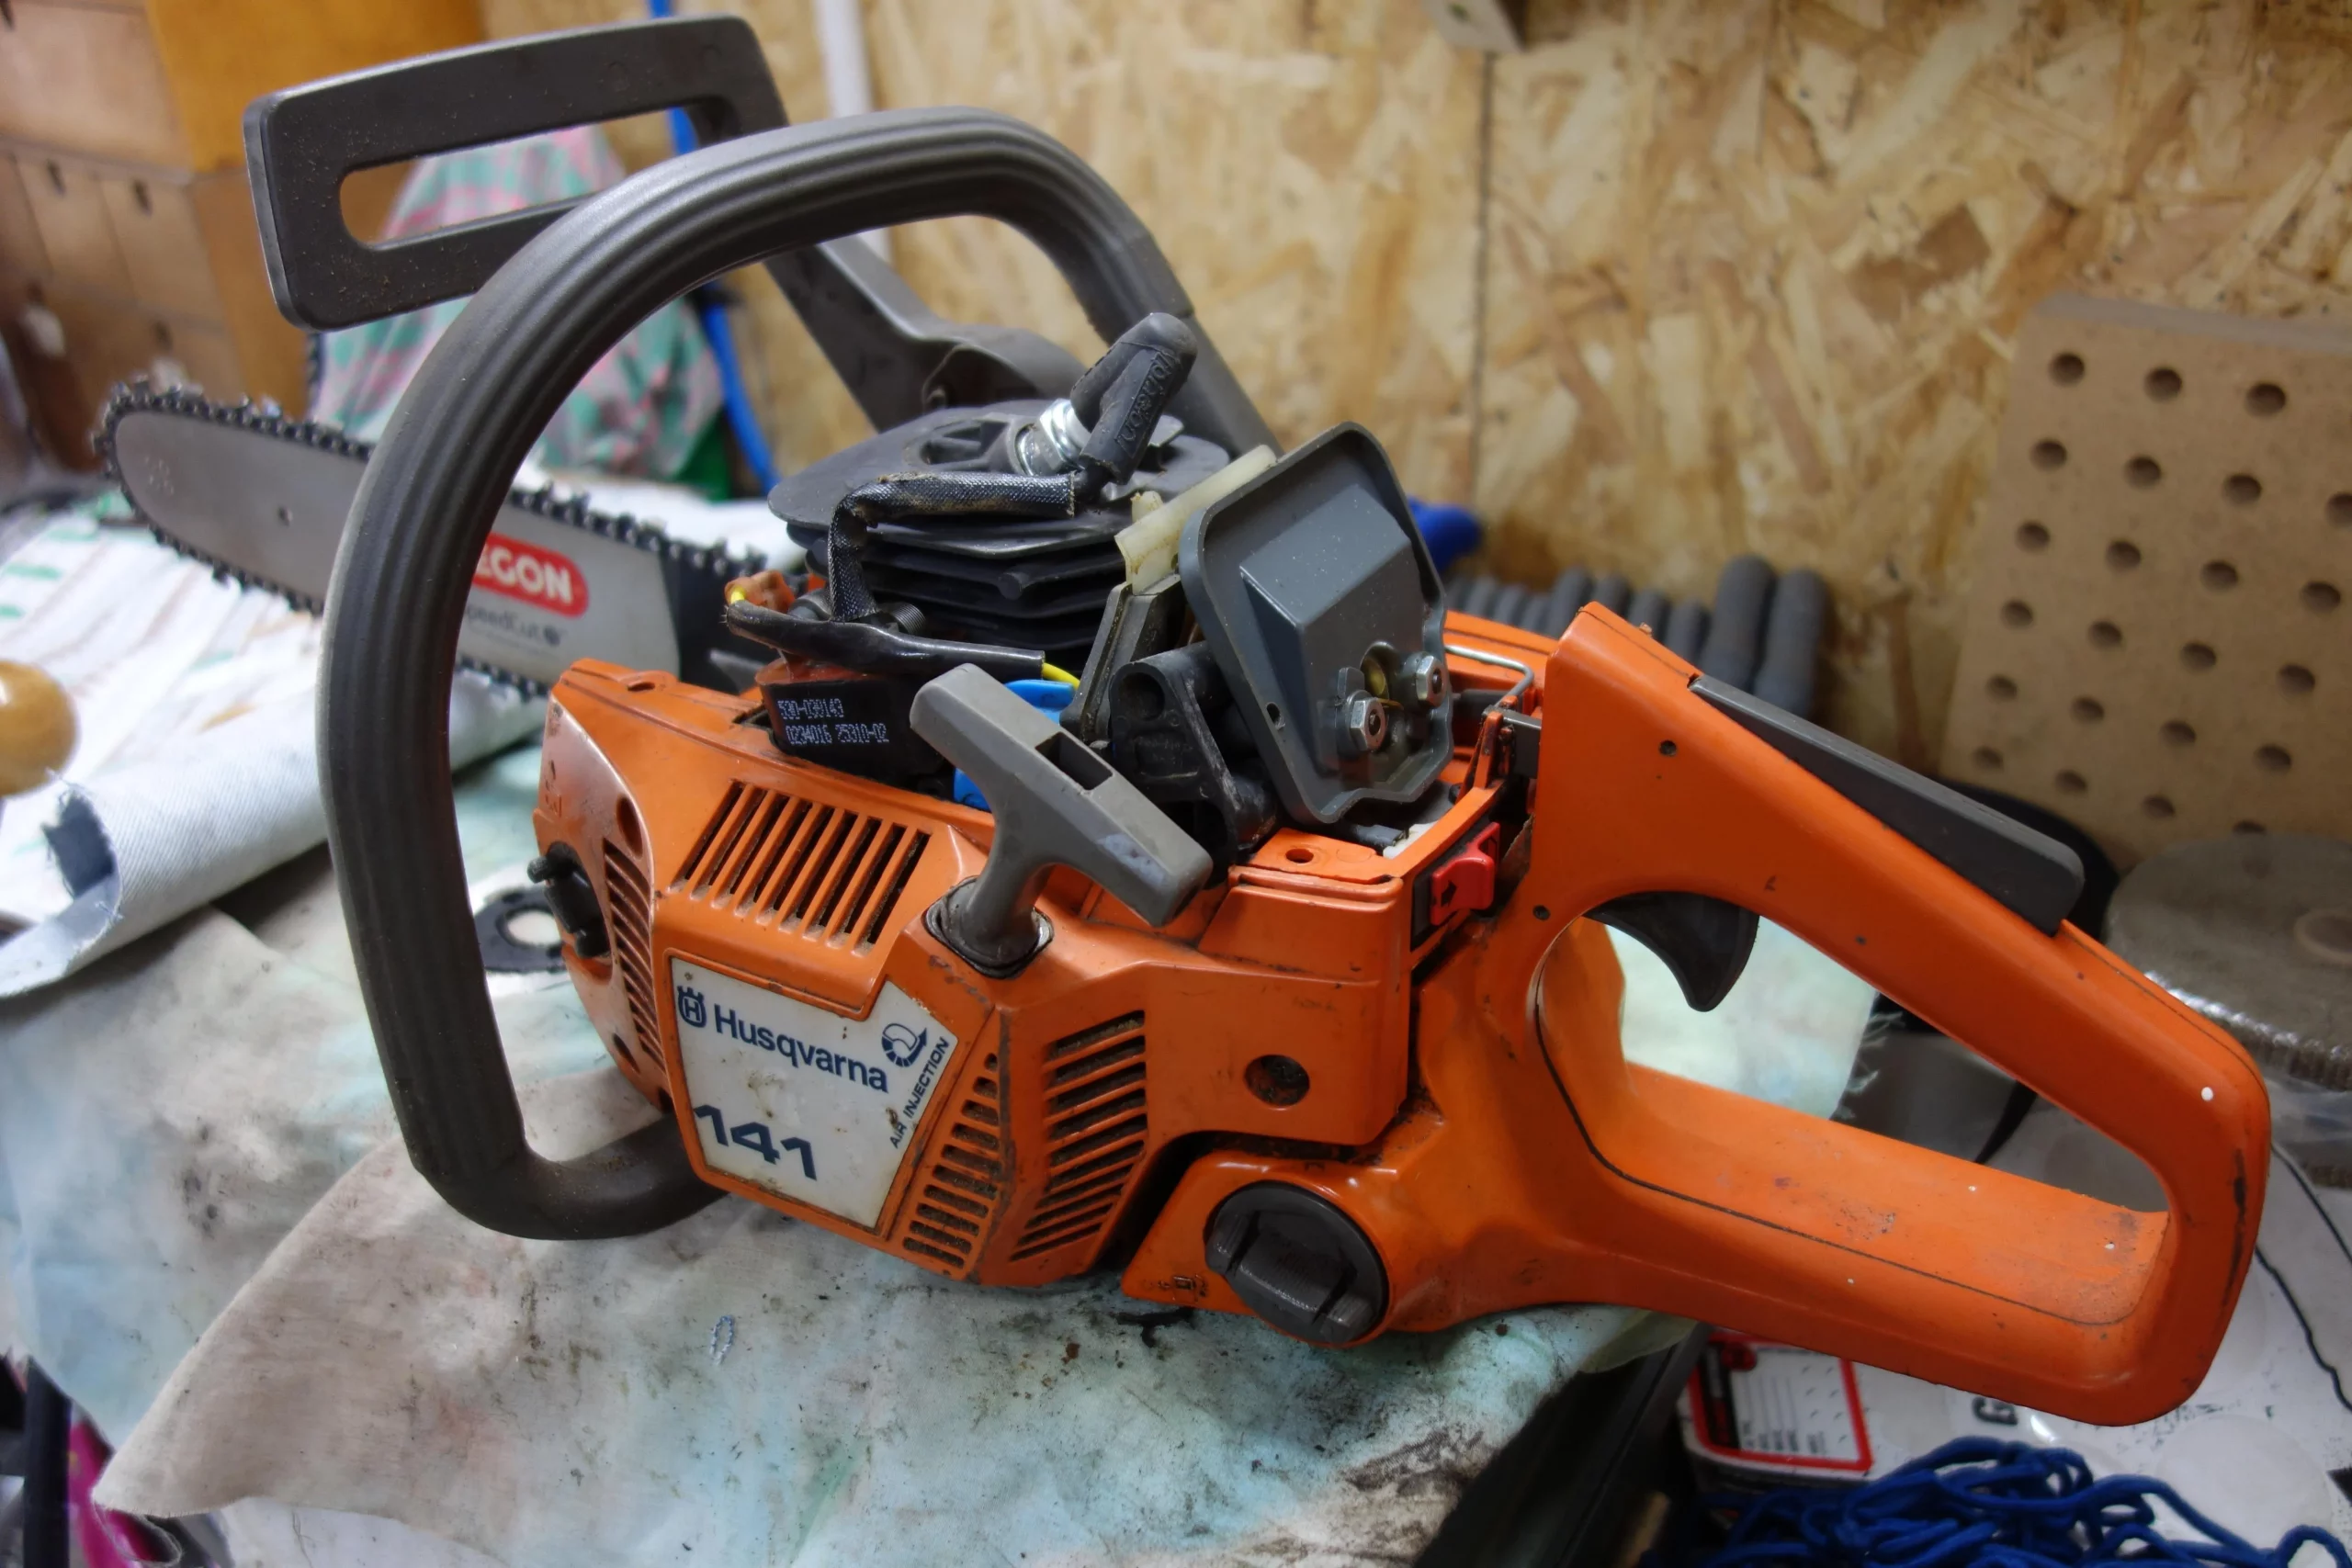 Husqvana 141: A Reliable and Affordable Chainsaw for Homeowners